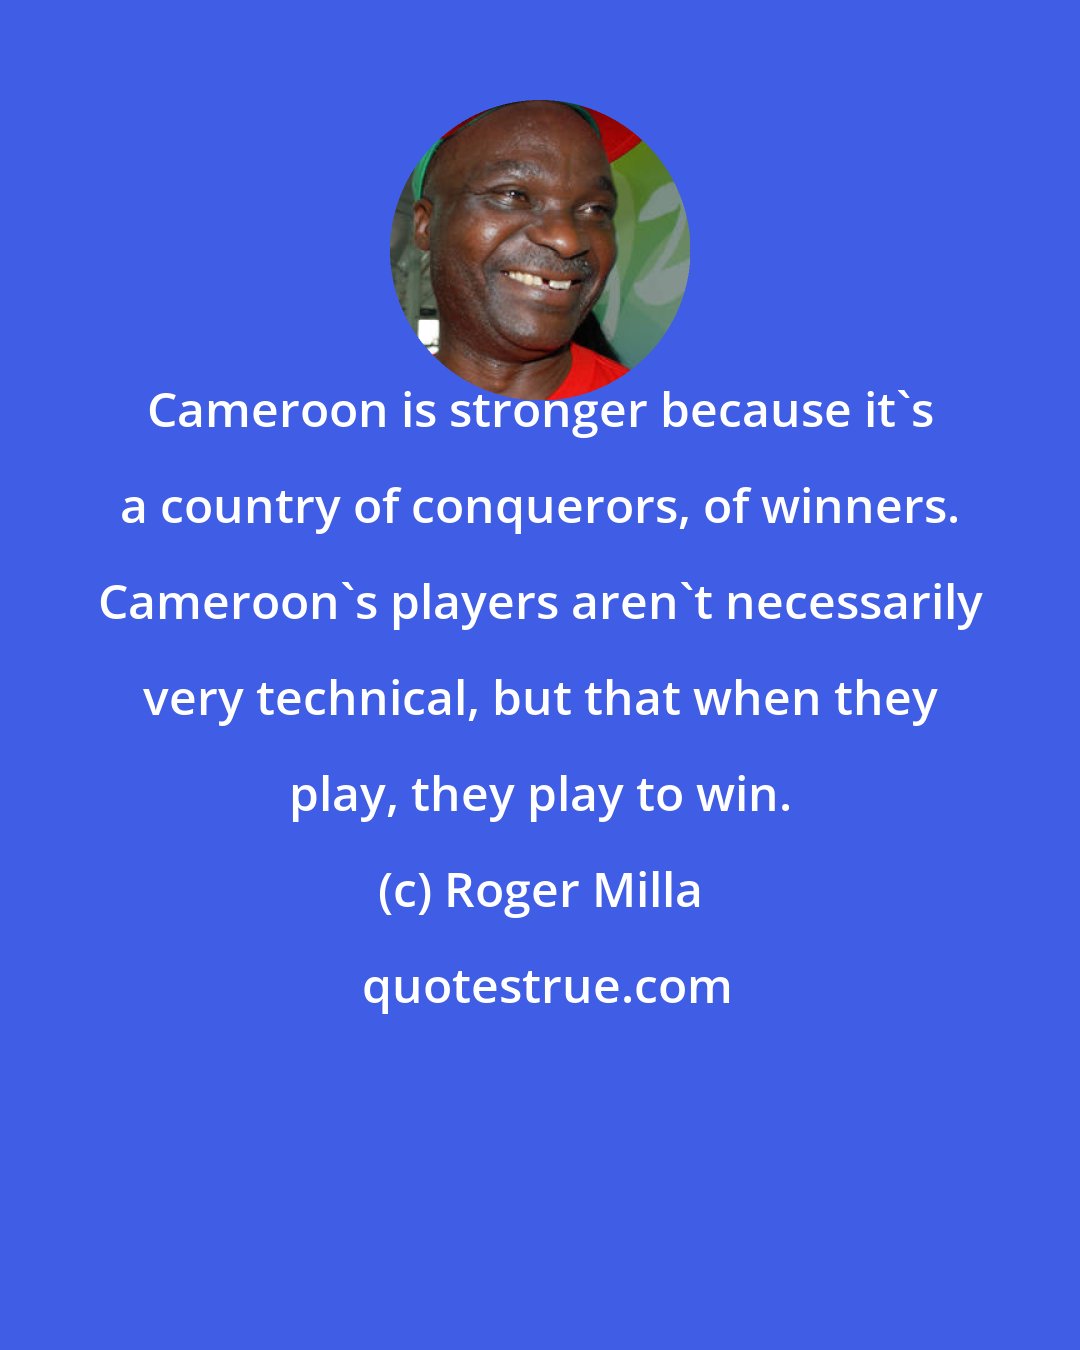 Roger Milla: Cameroon is stronger because it's a country of conquerors, of winners. Cameroon's players aren't necessarily very technical, but that when they play, they play to win.